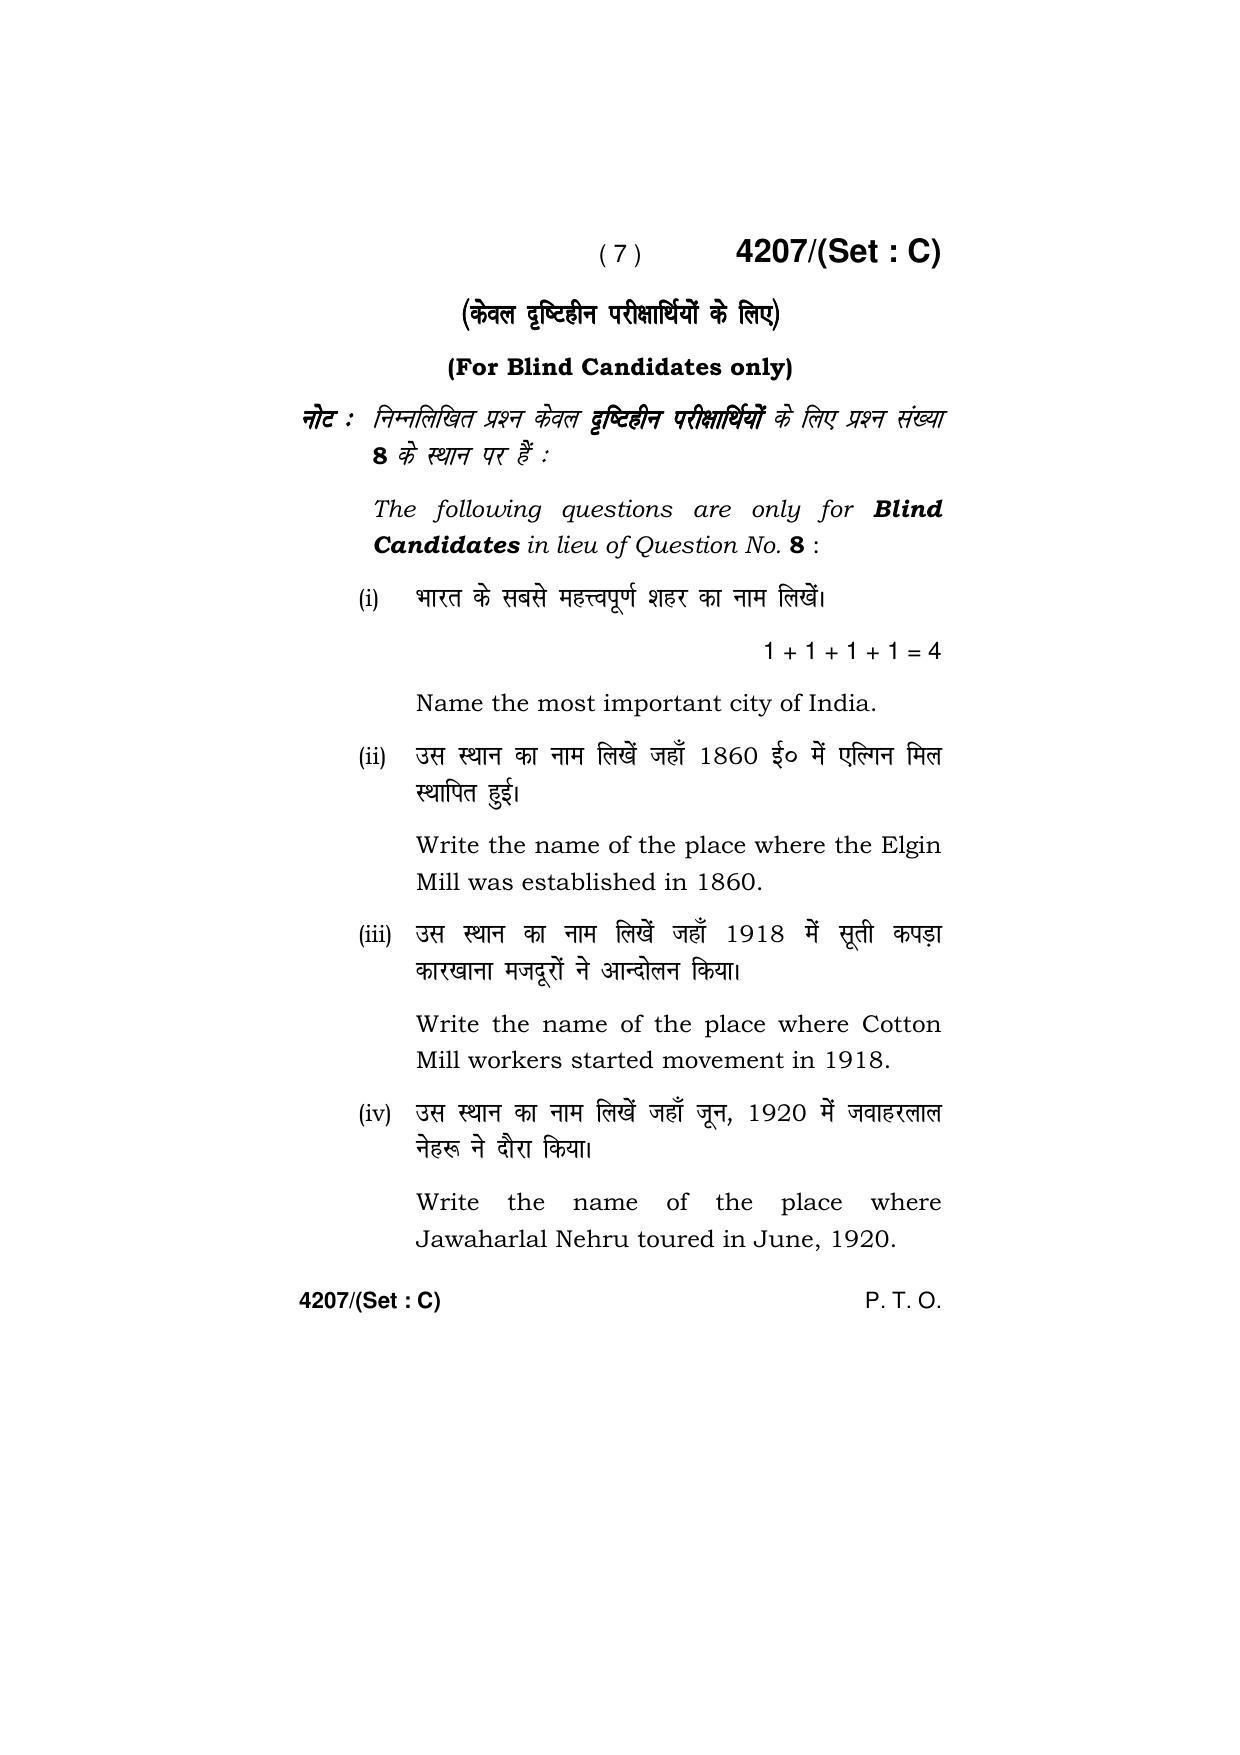 Haryana Board HBSE Class 10 Social Science (All Set) 2019 Question Paper - Page 37